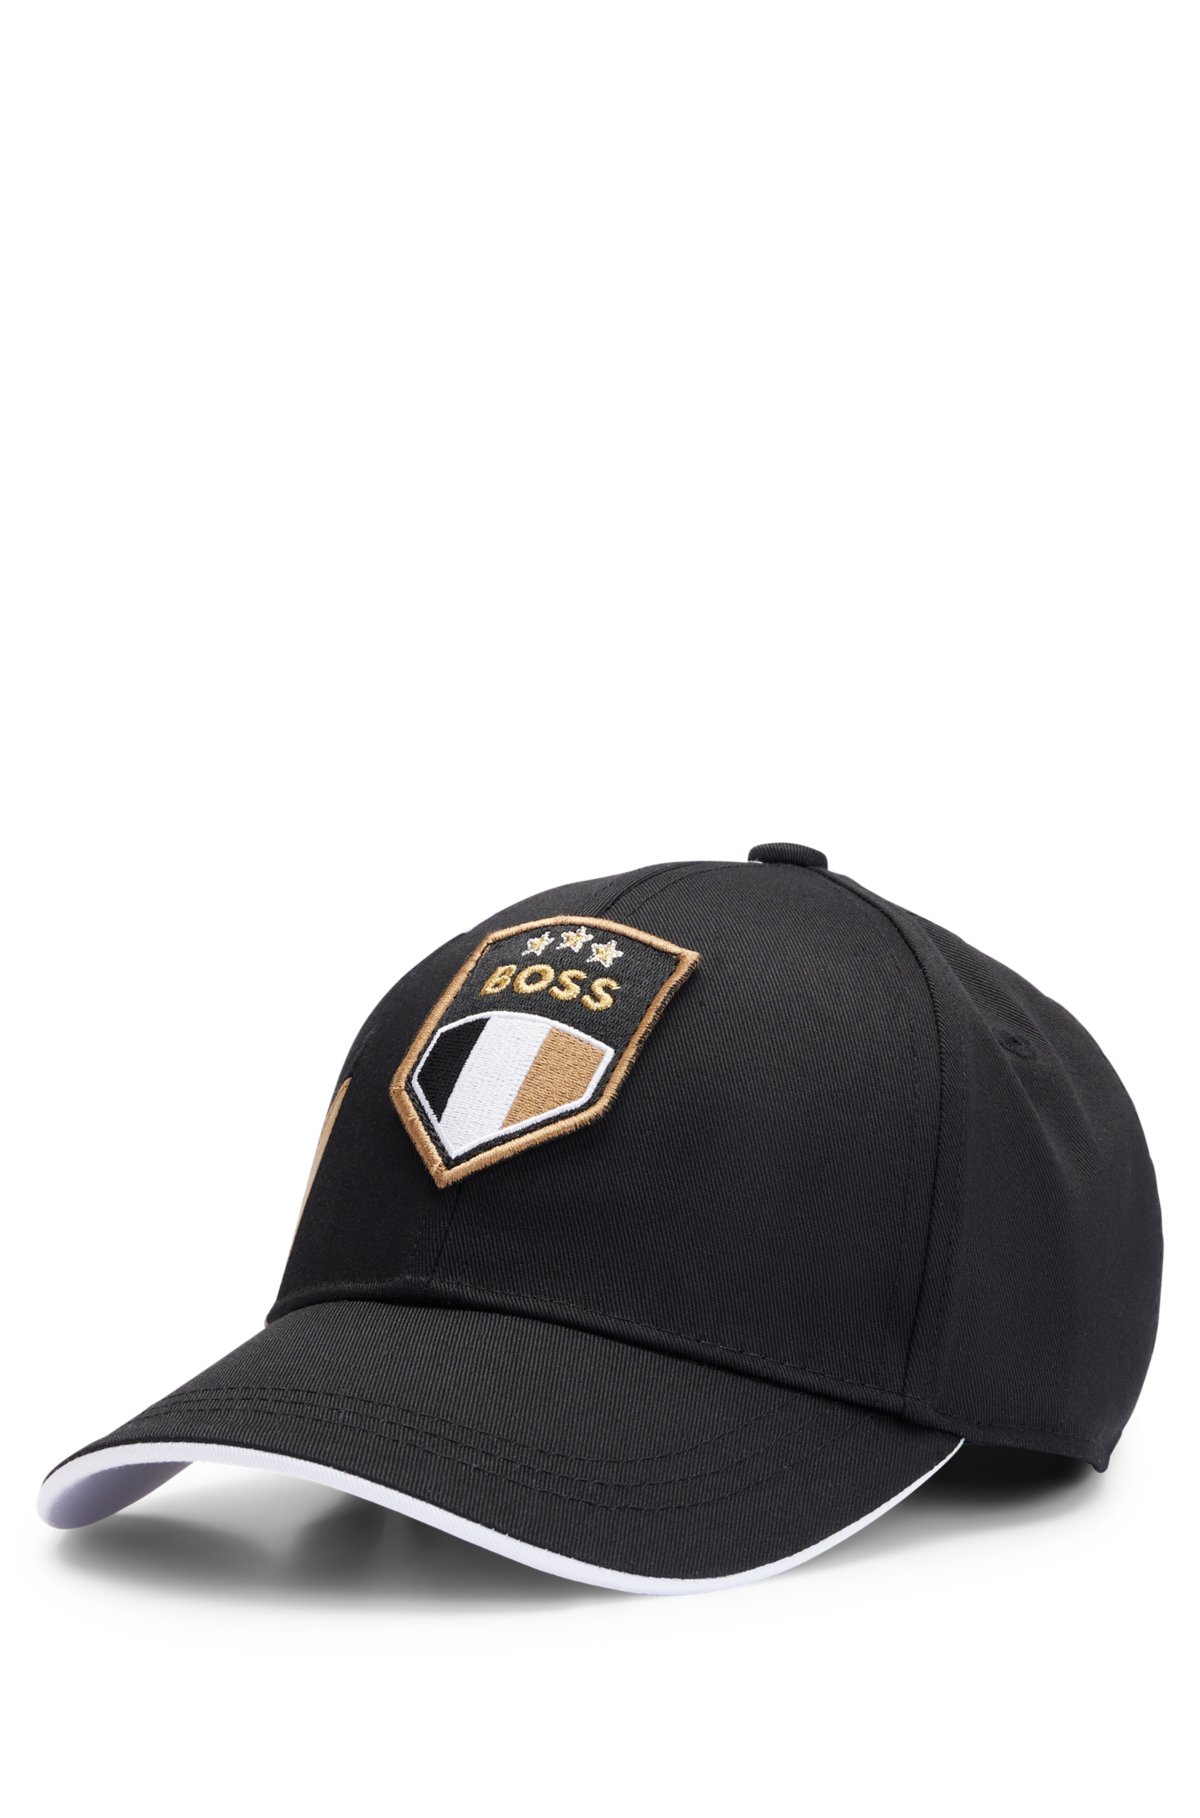 Kids' cap with colour-blocking and embroidered logo badge, Black